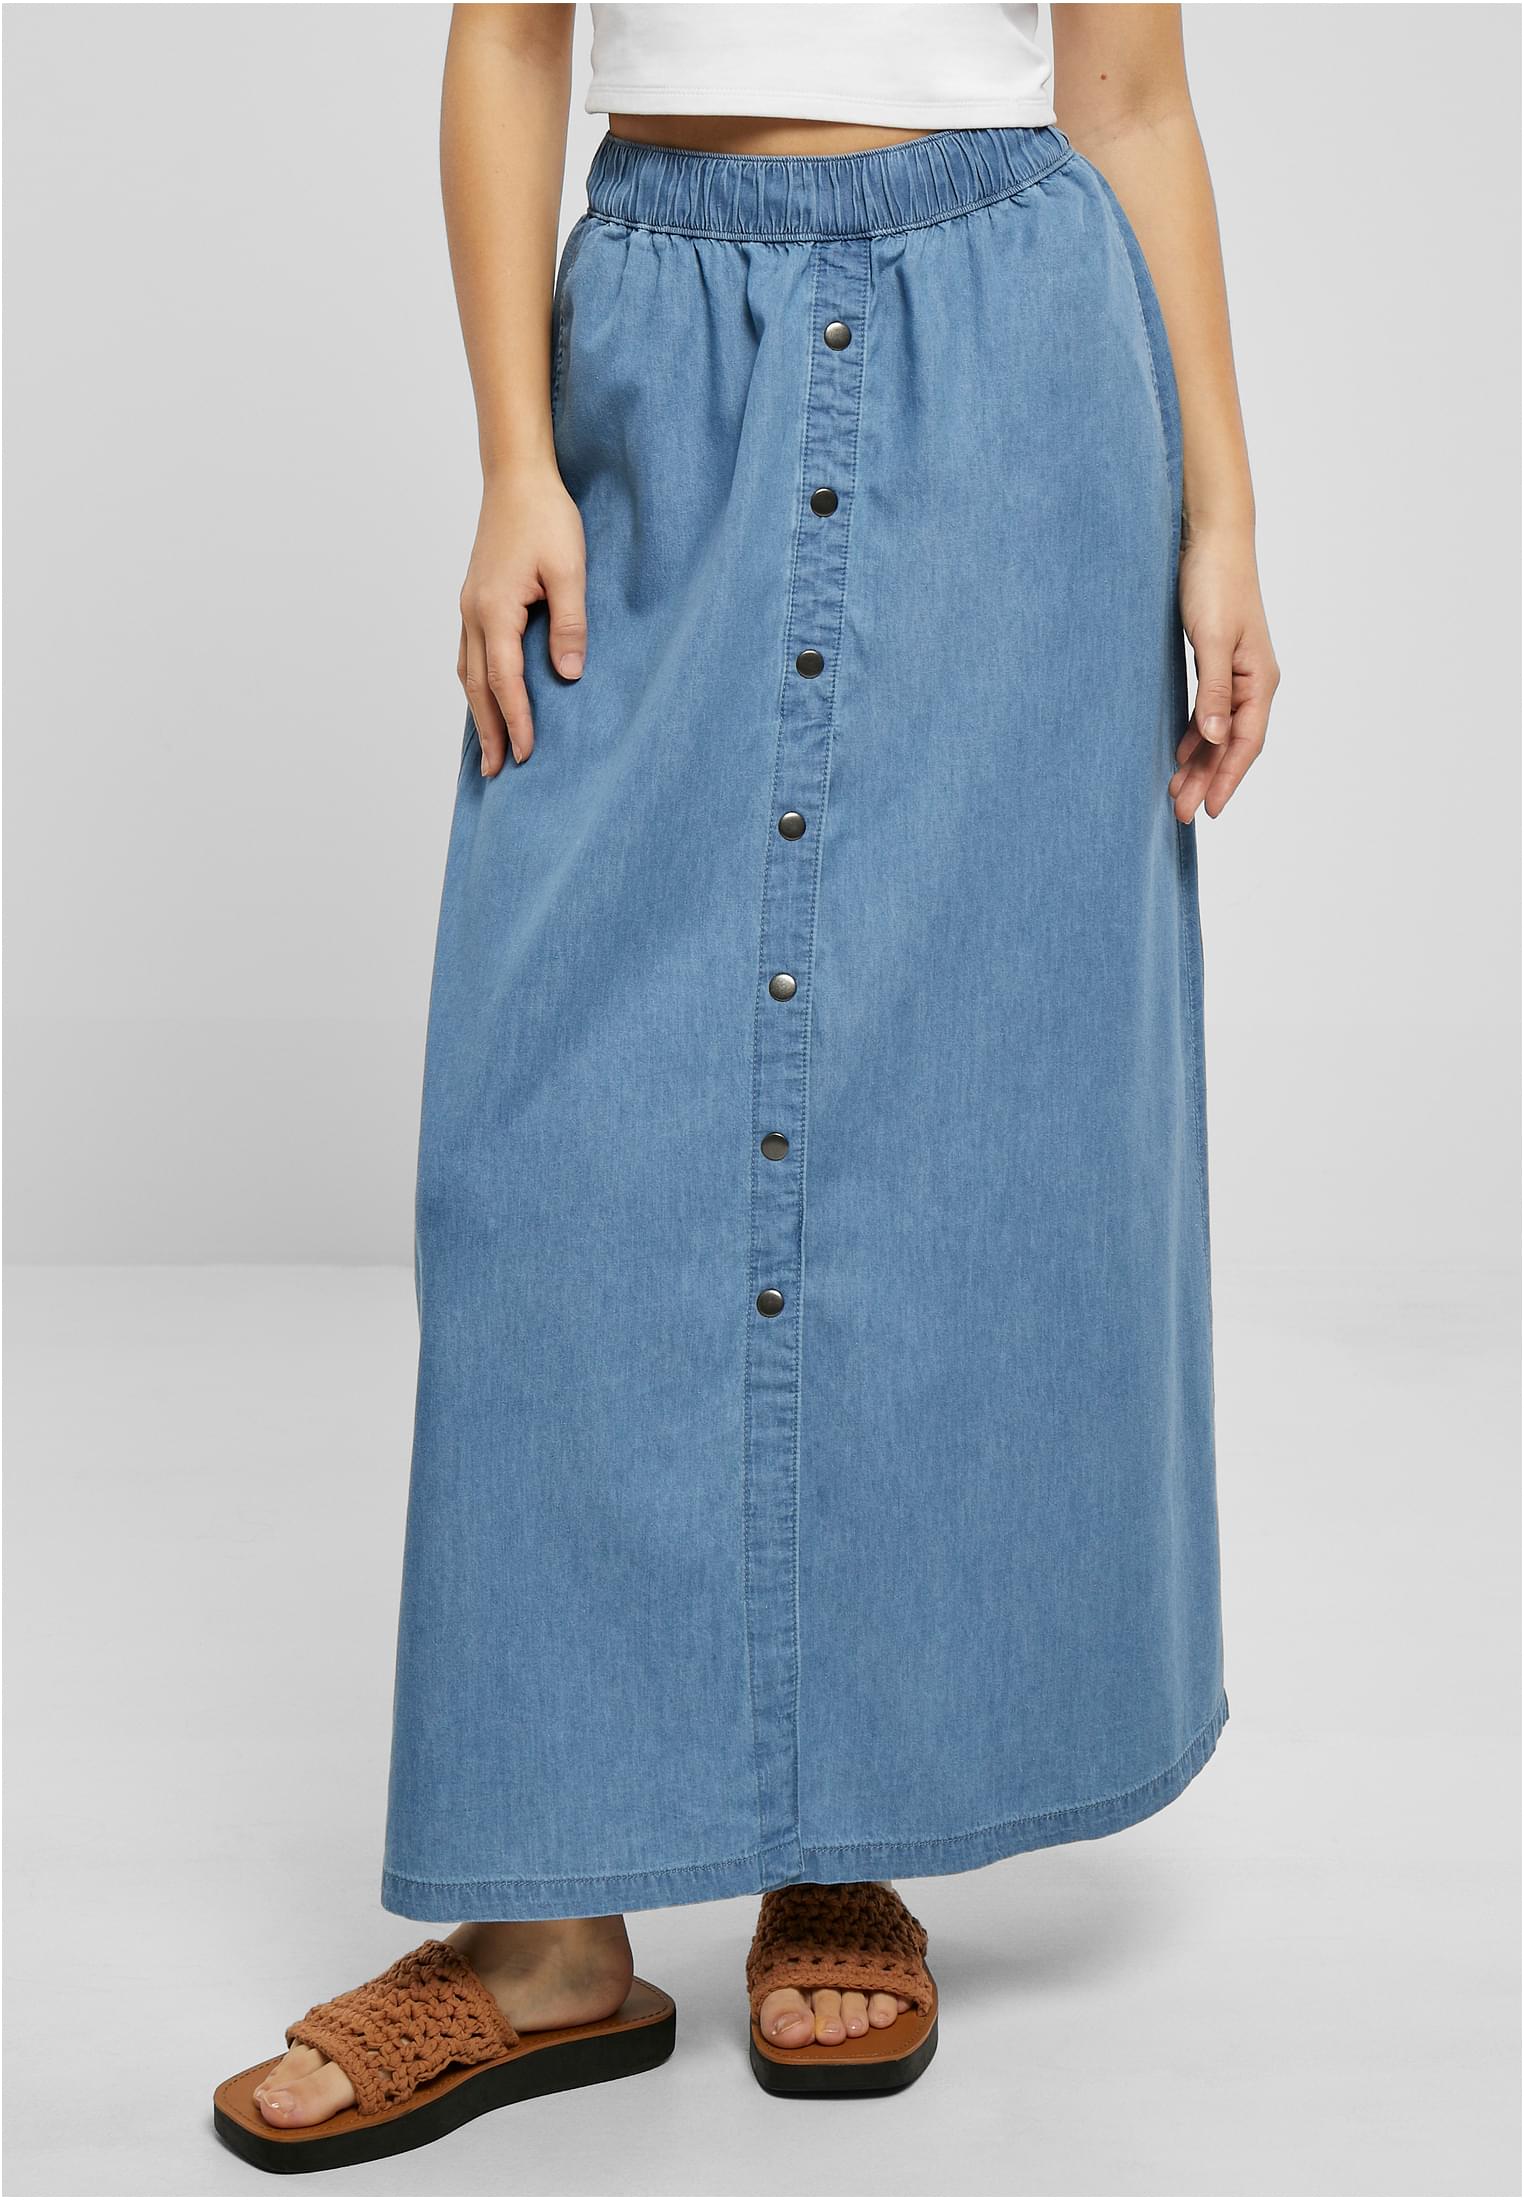 Women's long wide light denim skirt washed to the sky